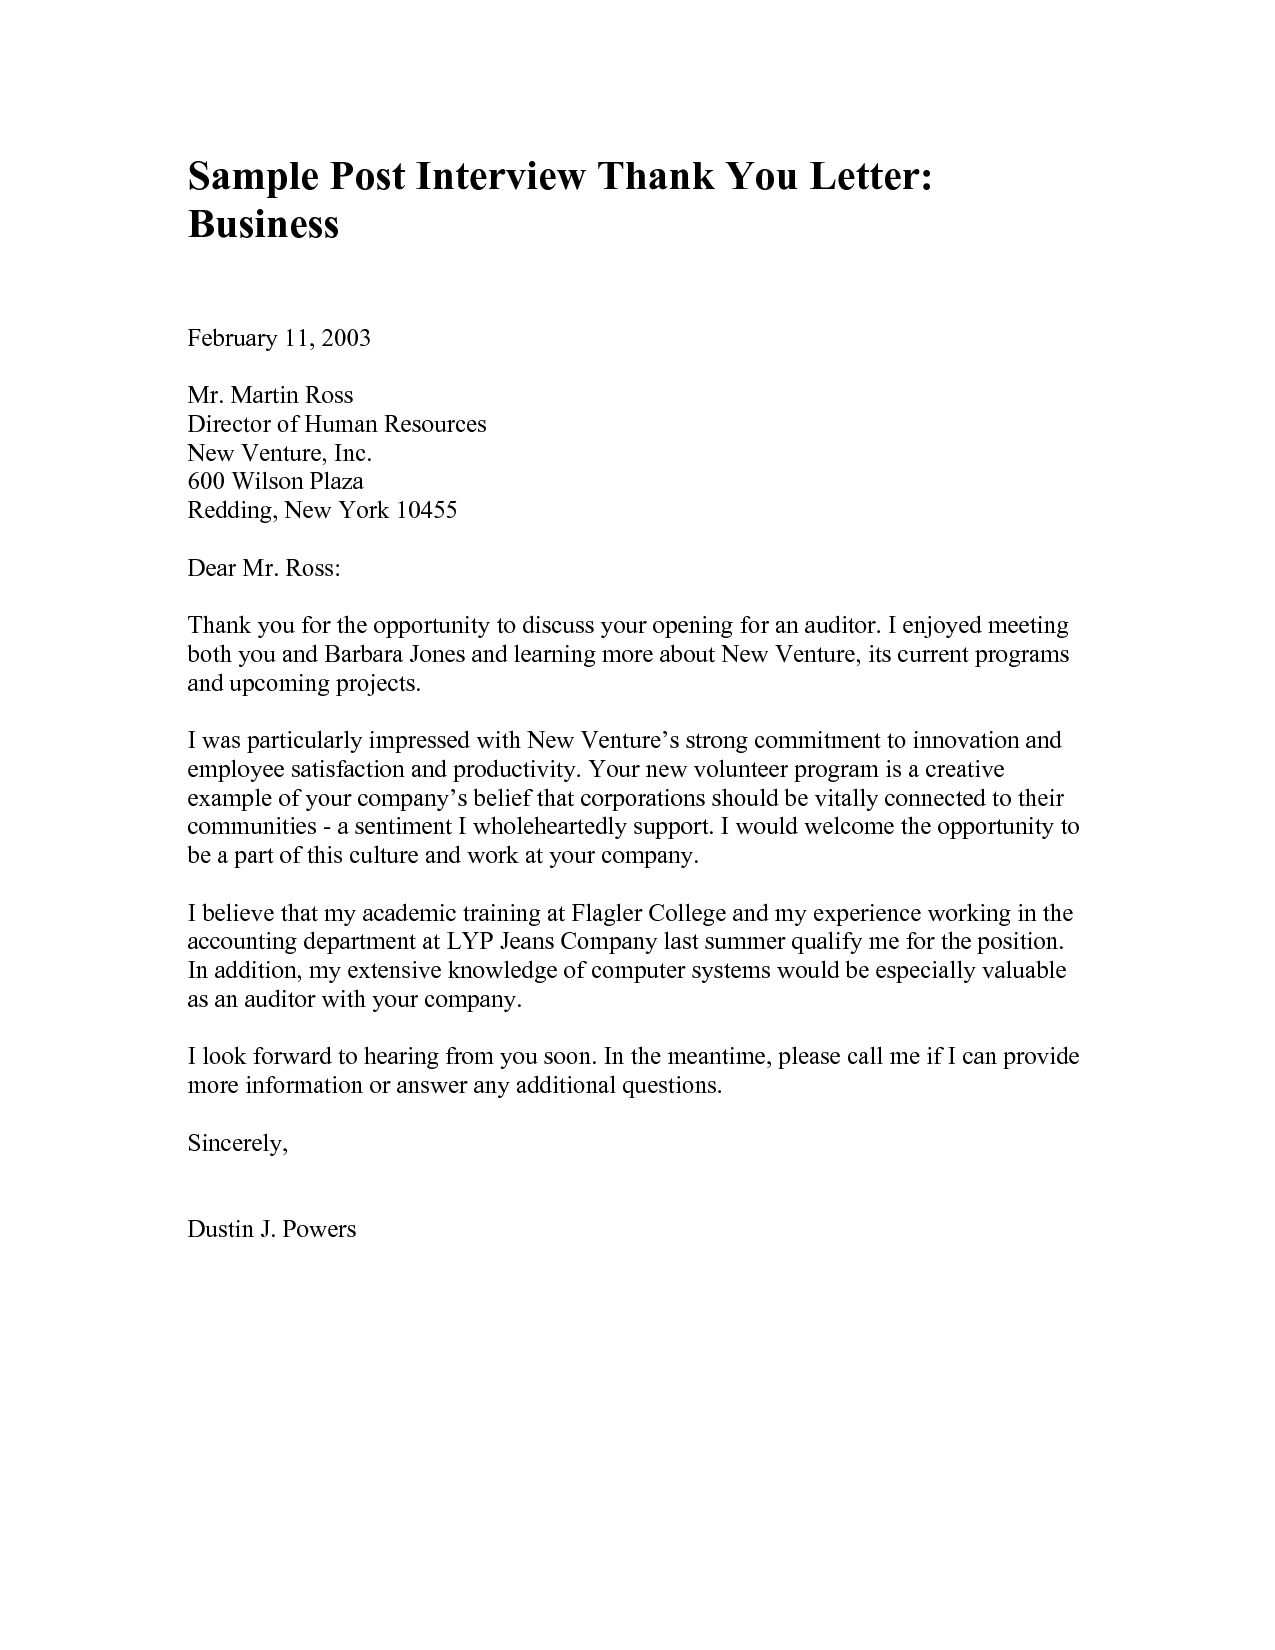 Thank You Letters To Business Scrumps